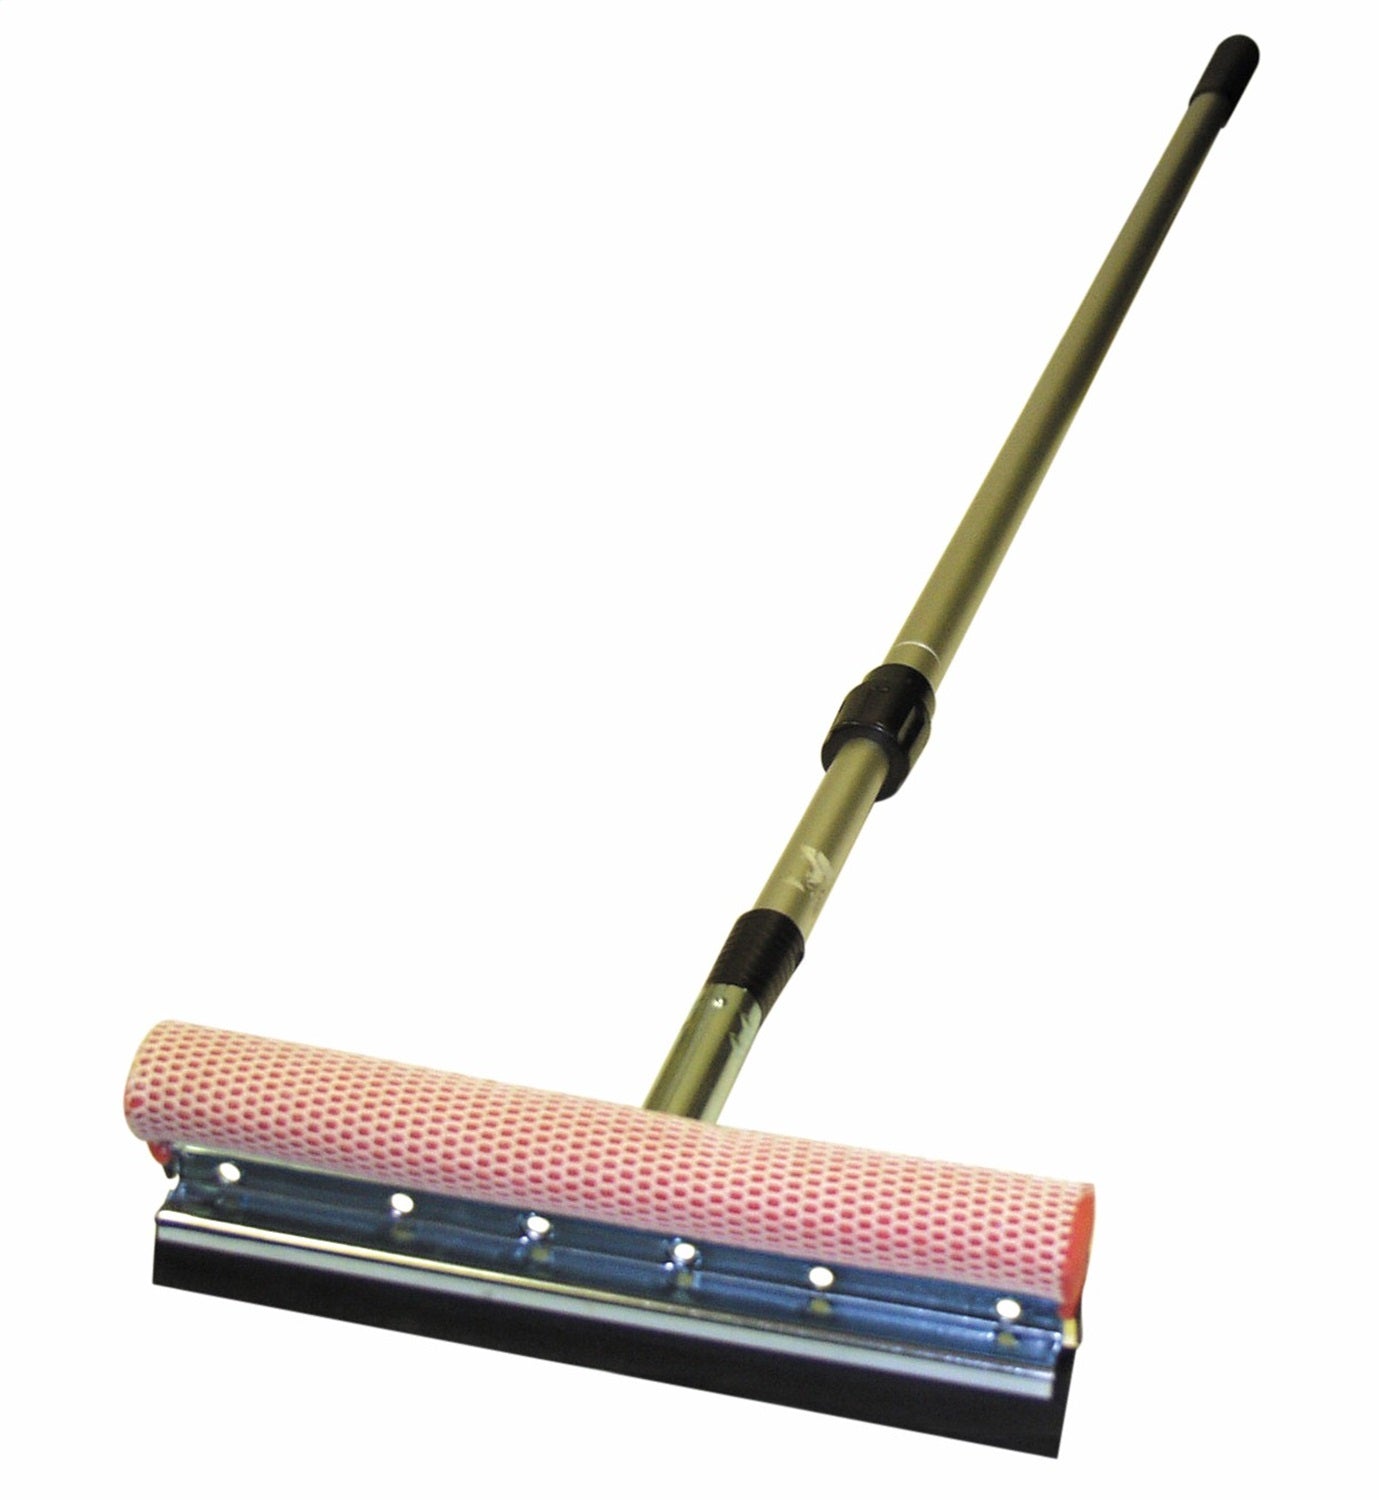 Carrand 9500 Professional Squeegee